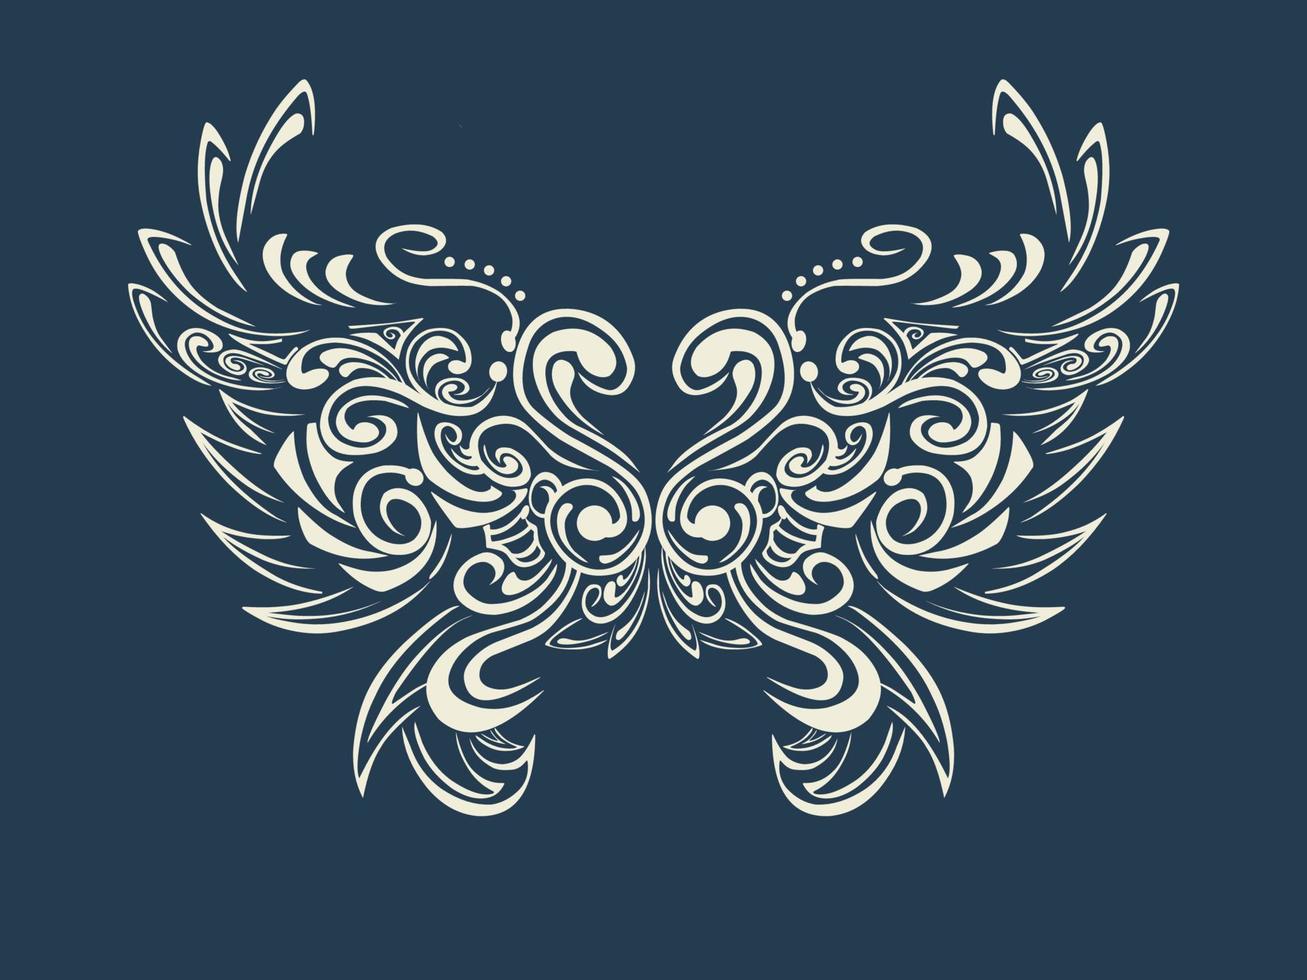 Abstract angel wings tattoo vector aesthetic design